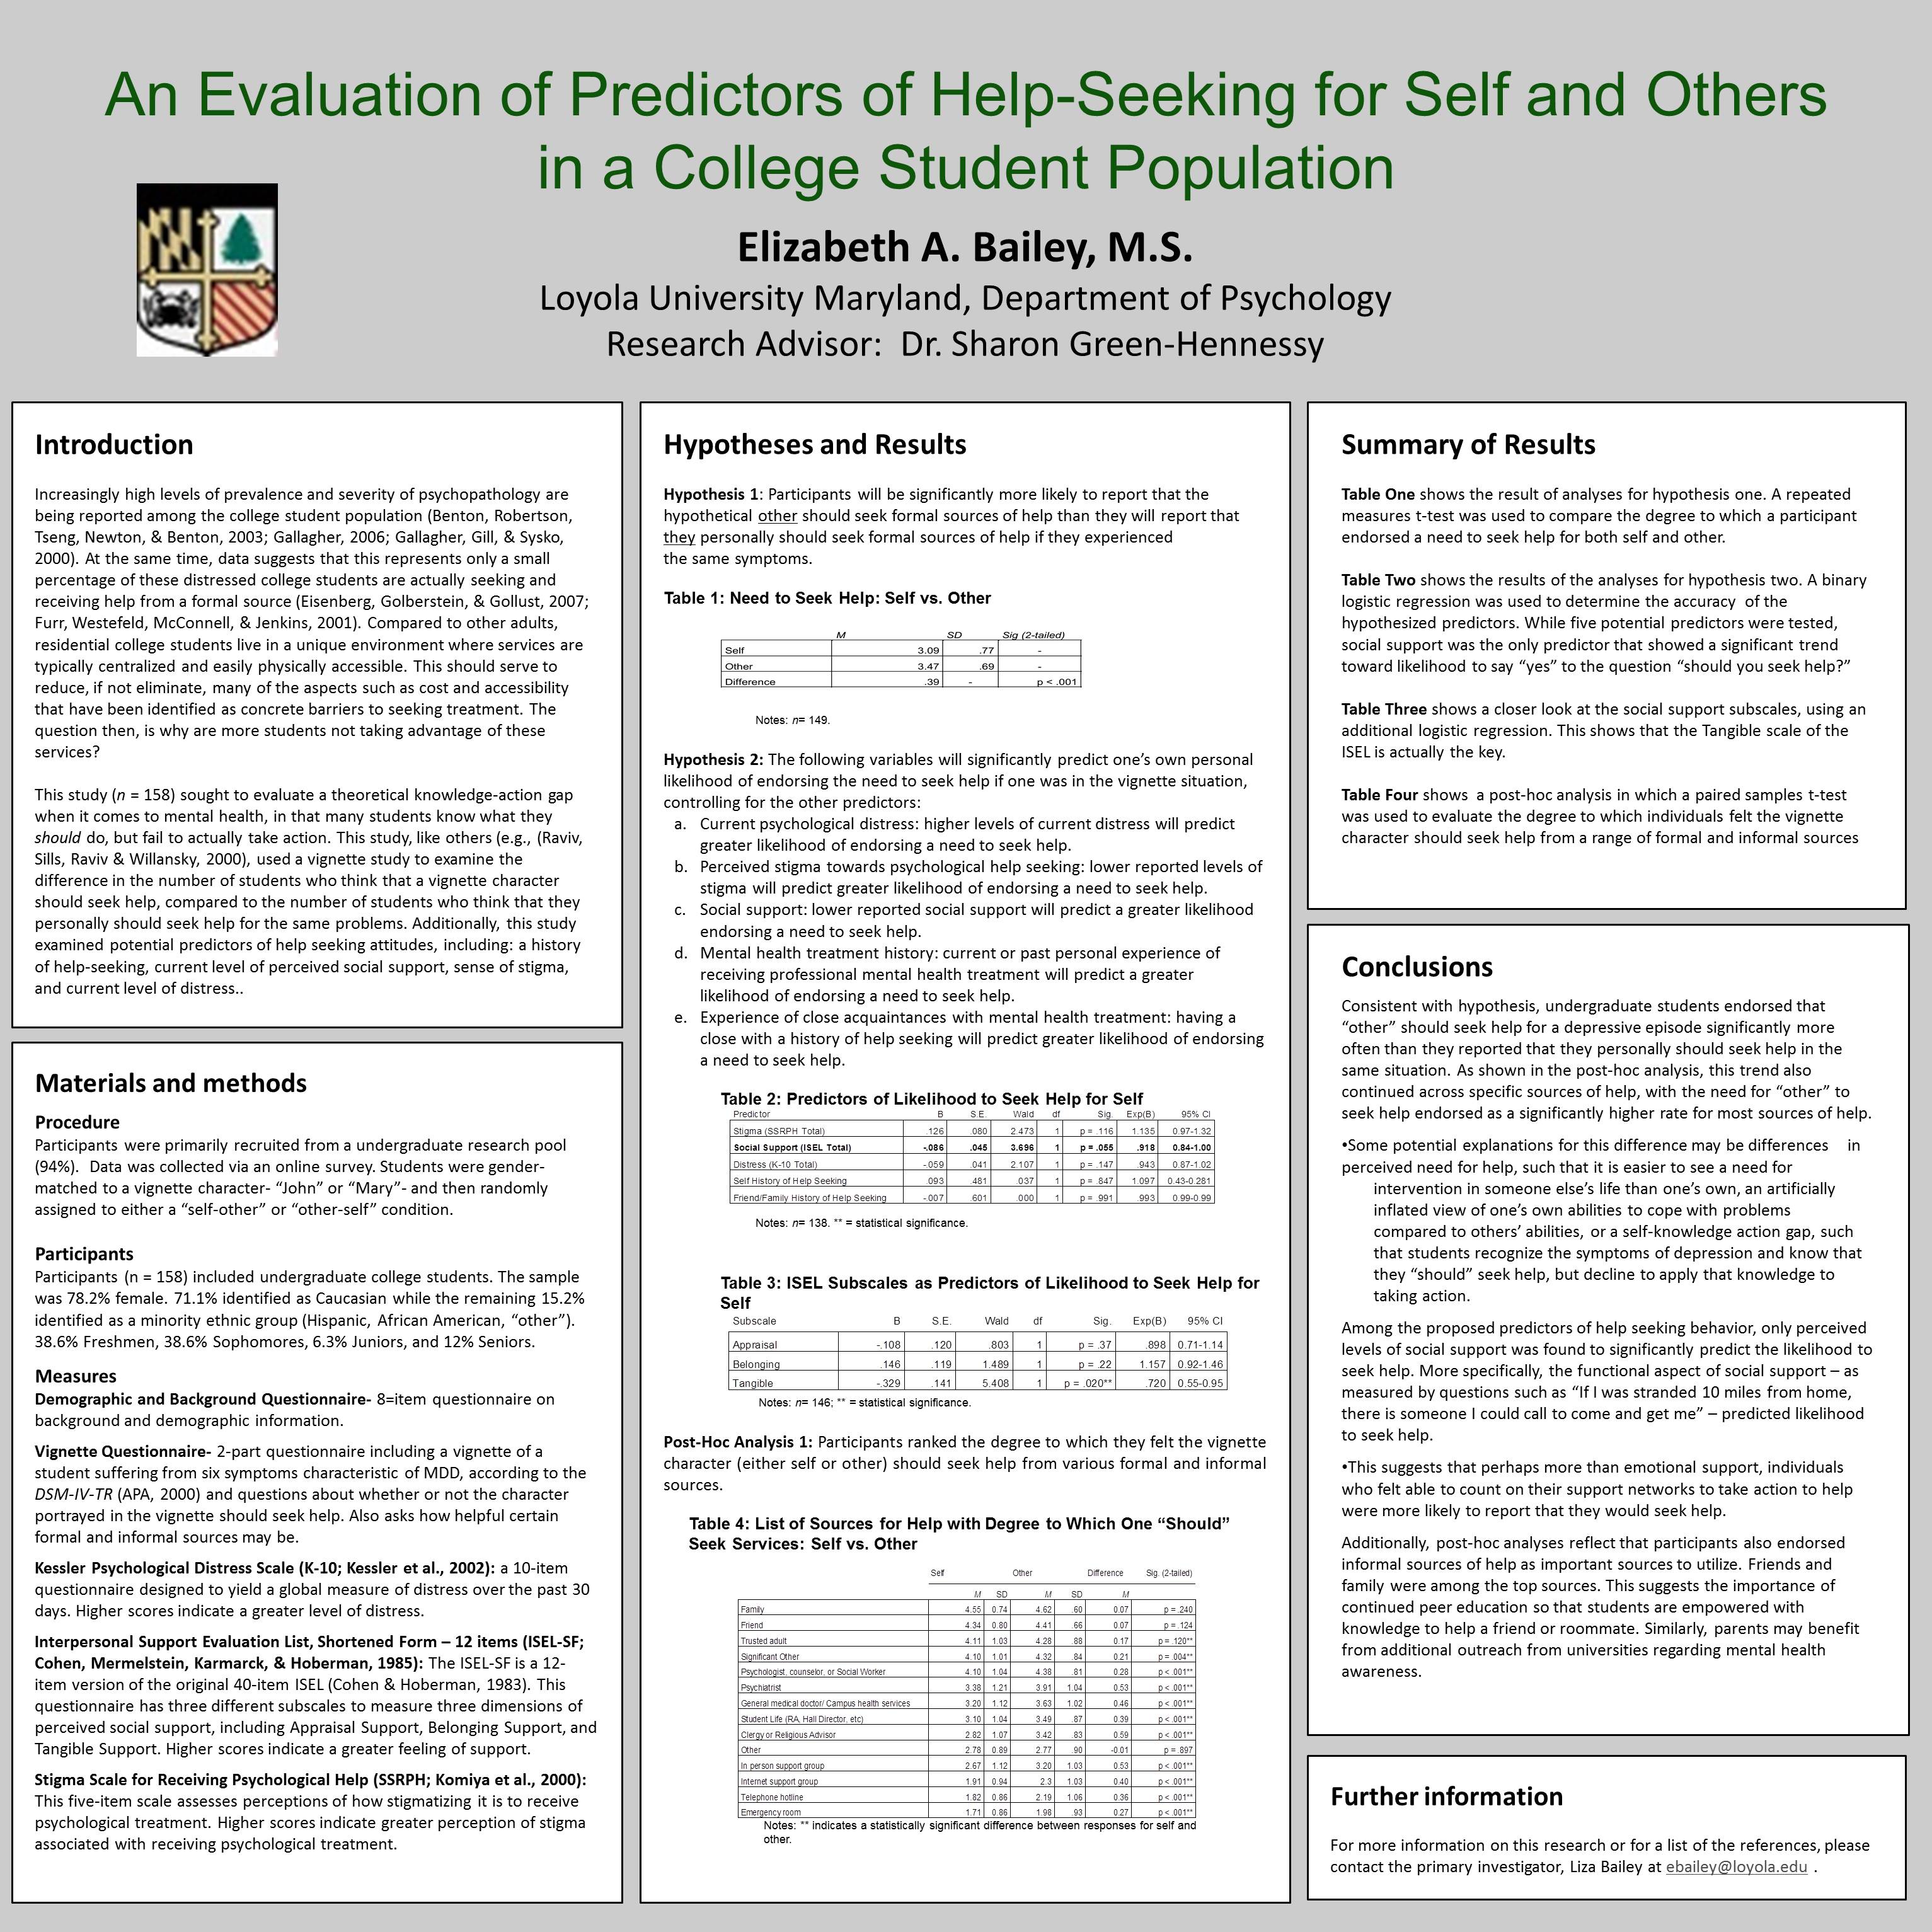 Enlarged poster image: An Evaluation of Predictors of Help-Seeking for Self and Others in a College Student Population